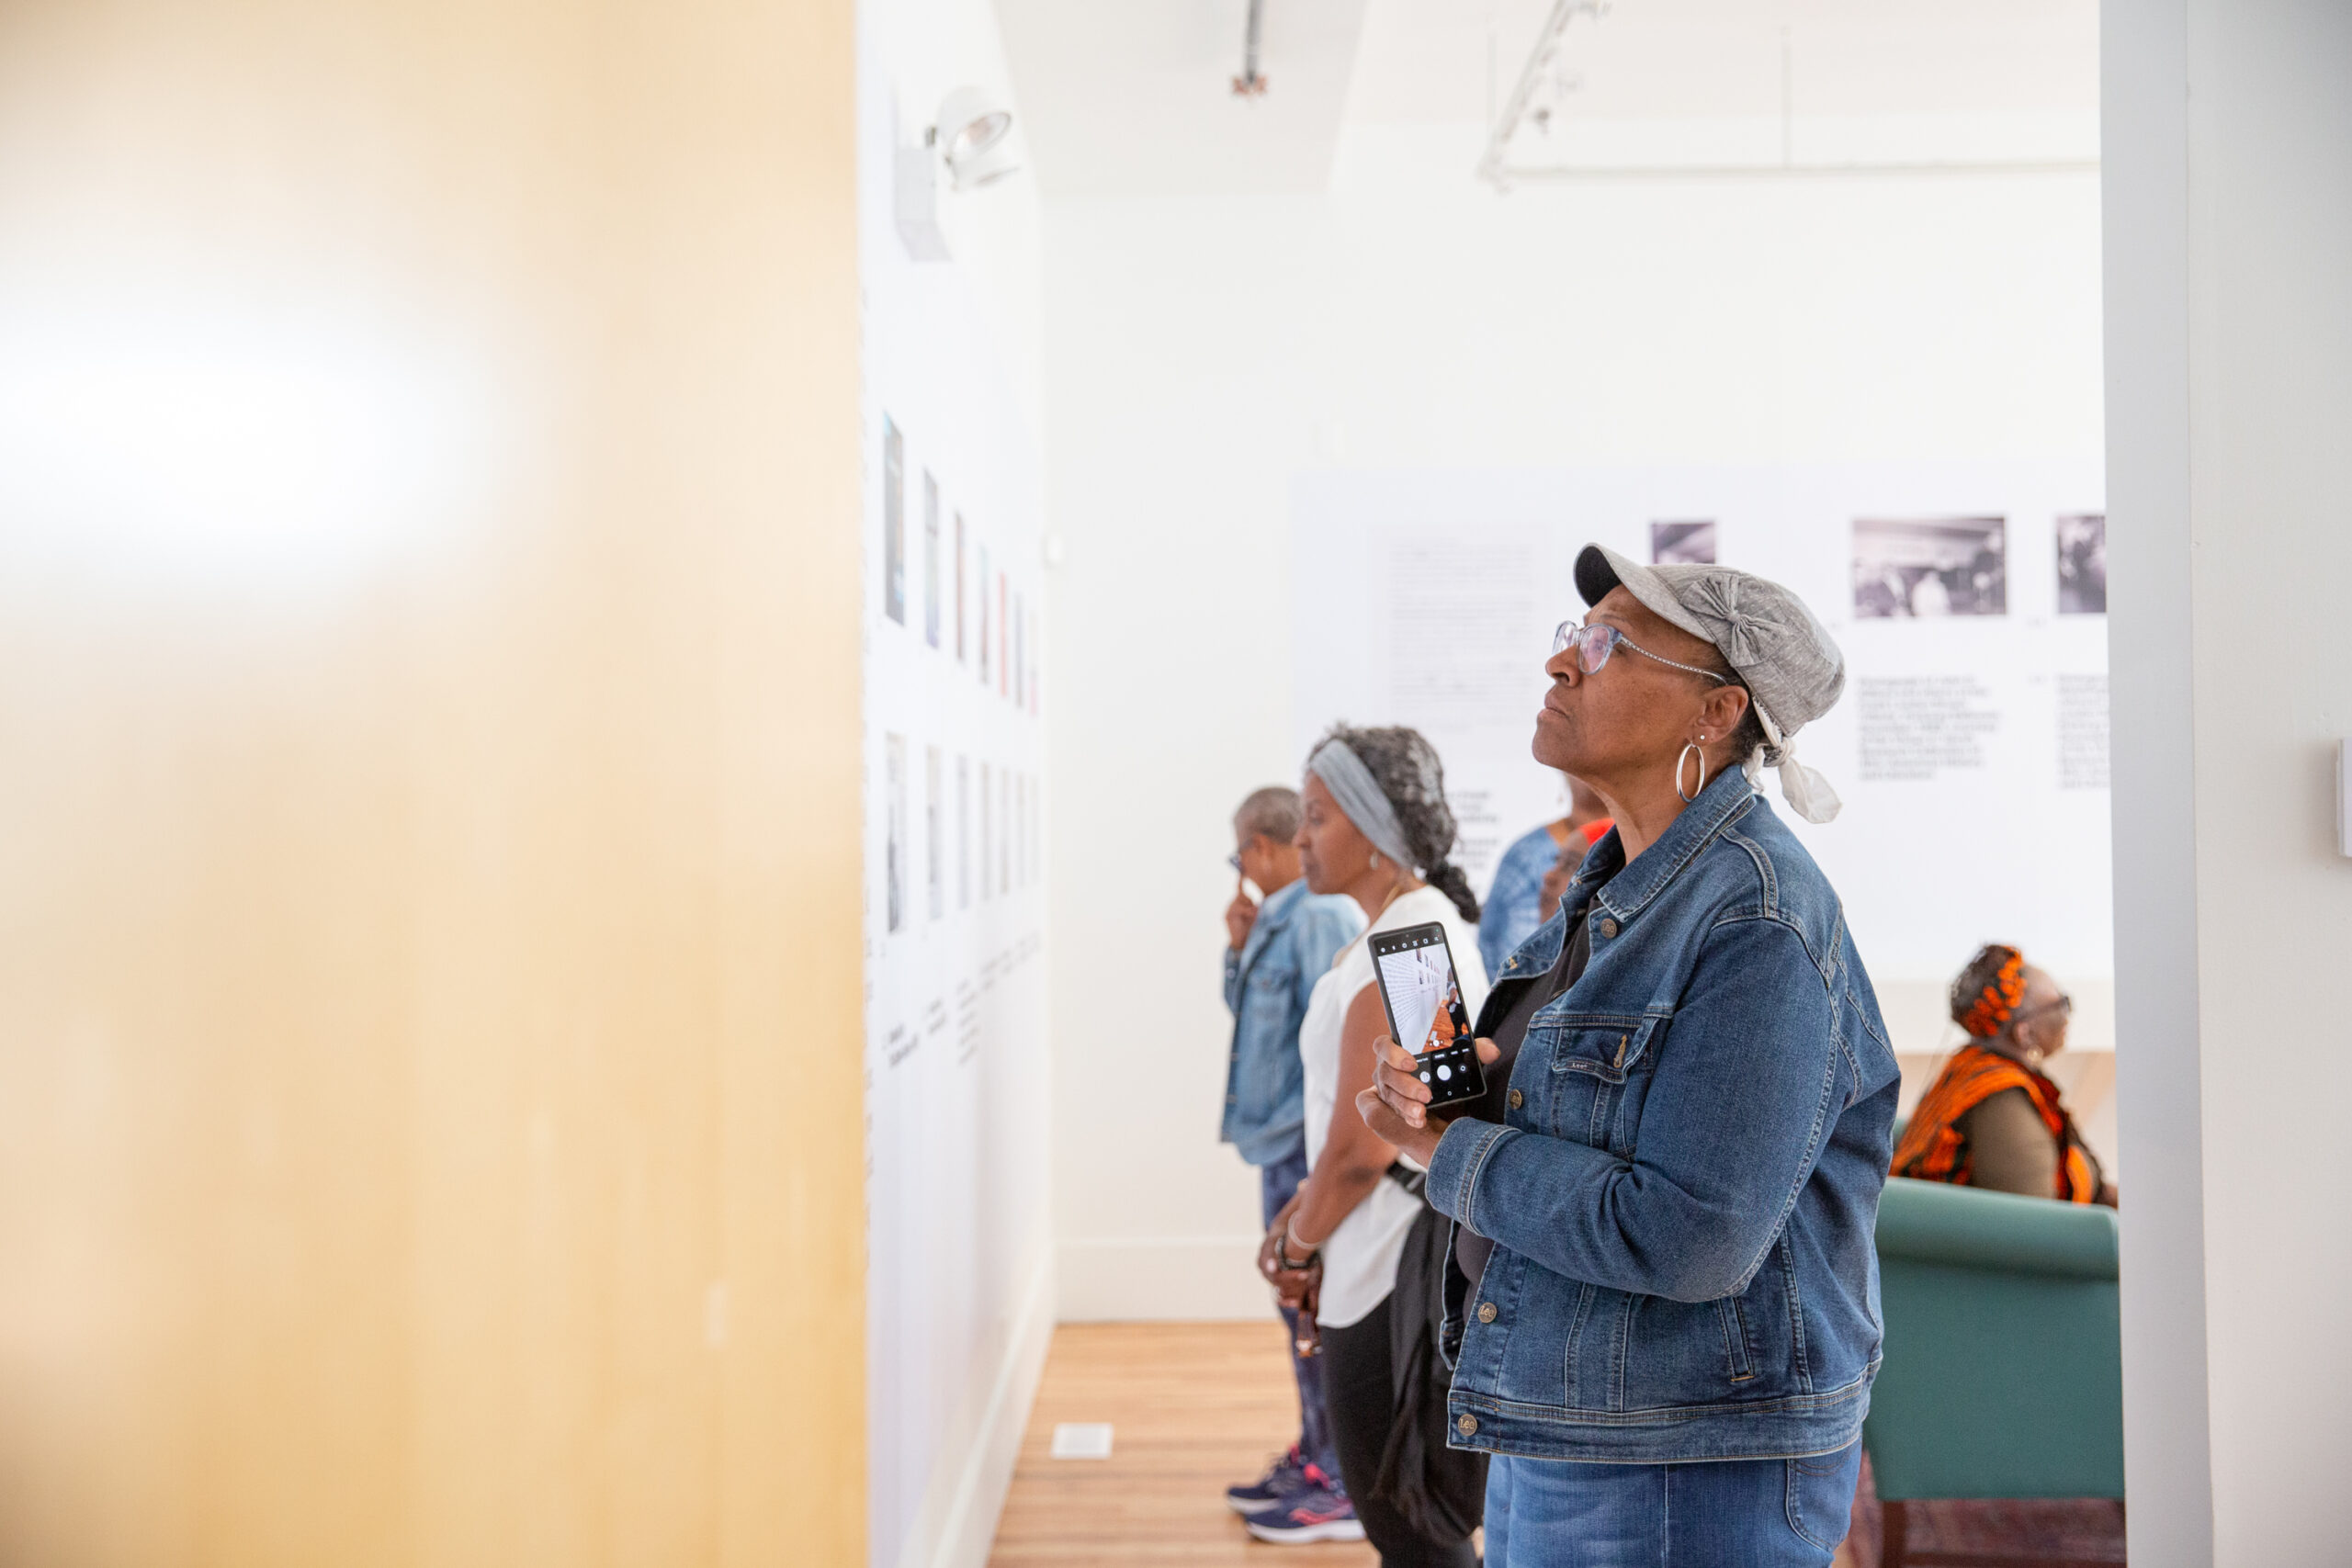 Visitors viewing artwork on a gallery wall. In foreground, visitor wearing a hat, hoop earrings, and a jean jacket. Other visitors in the background.